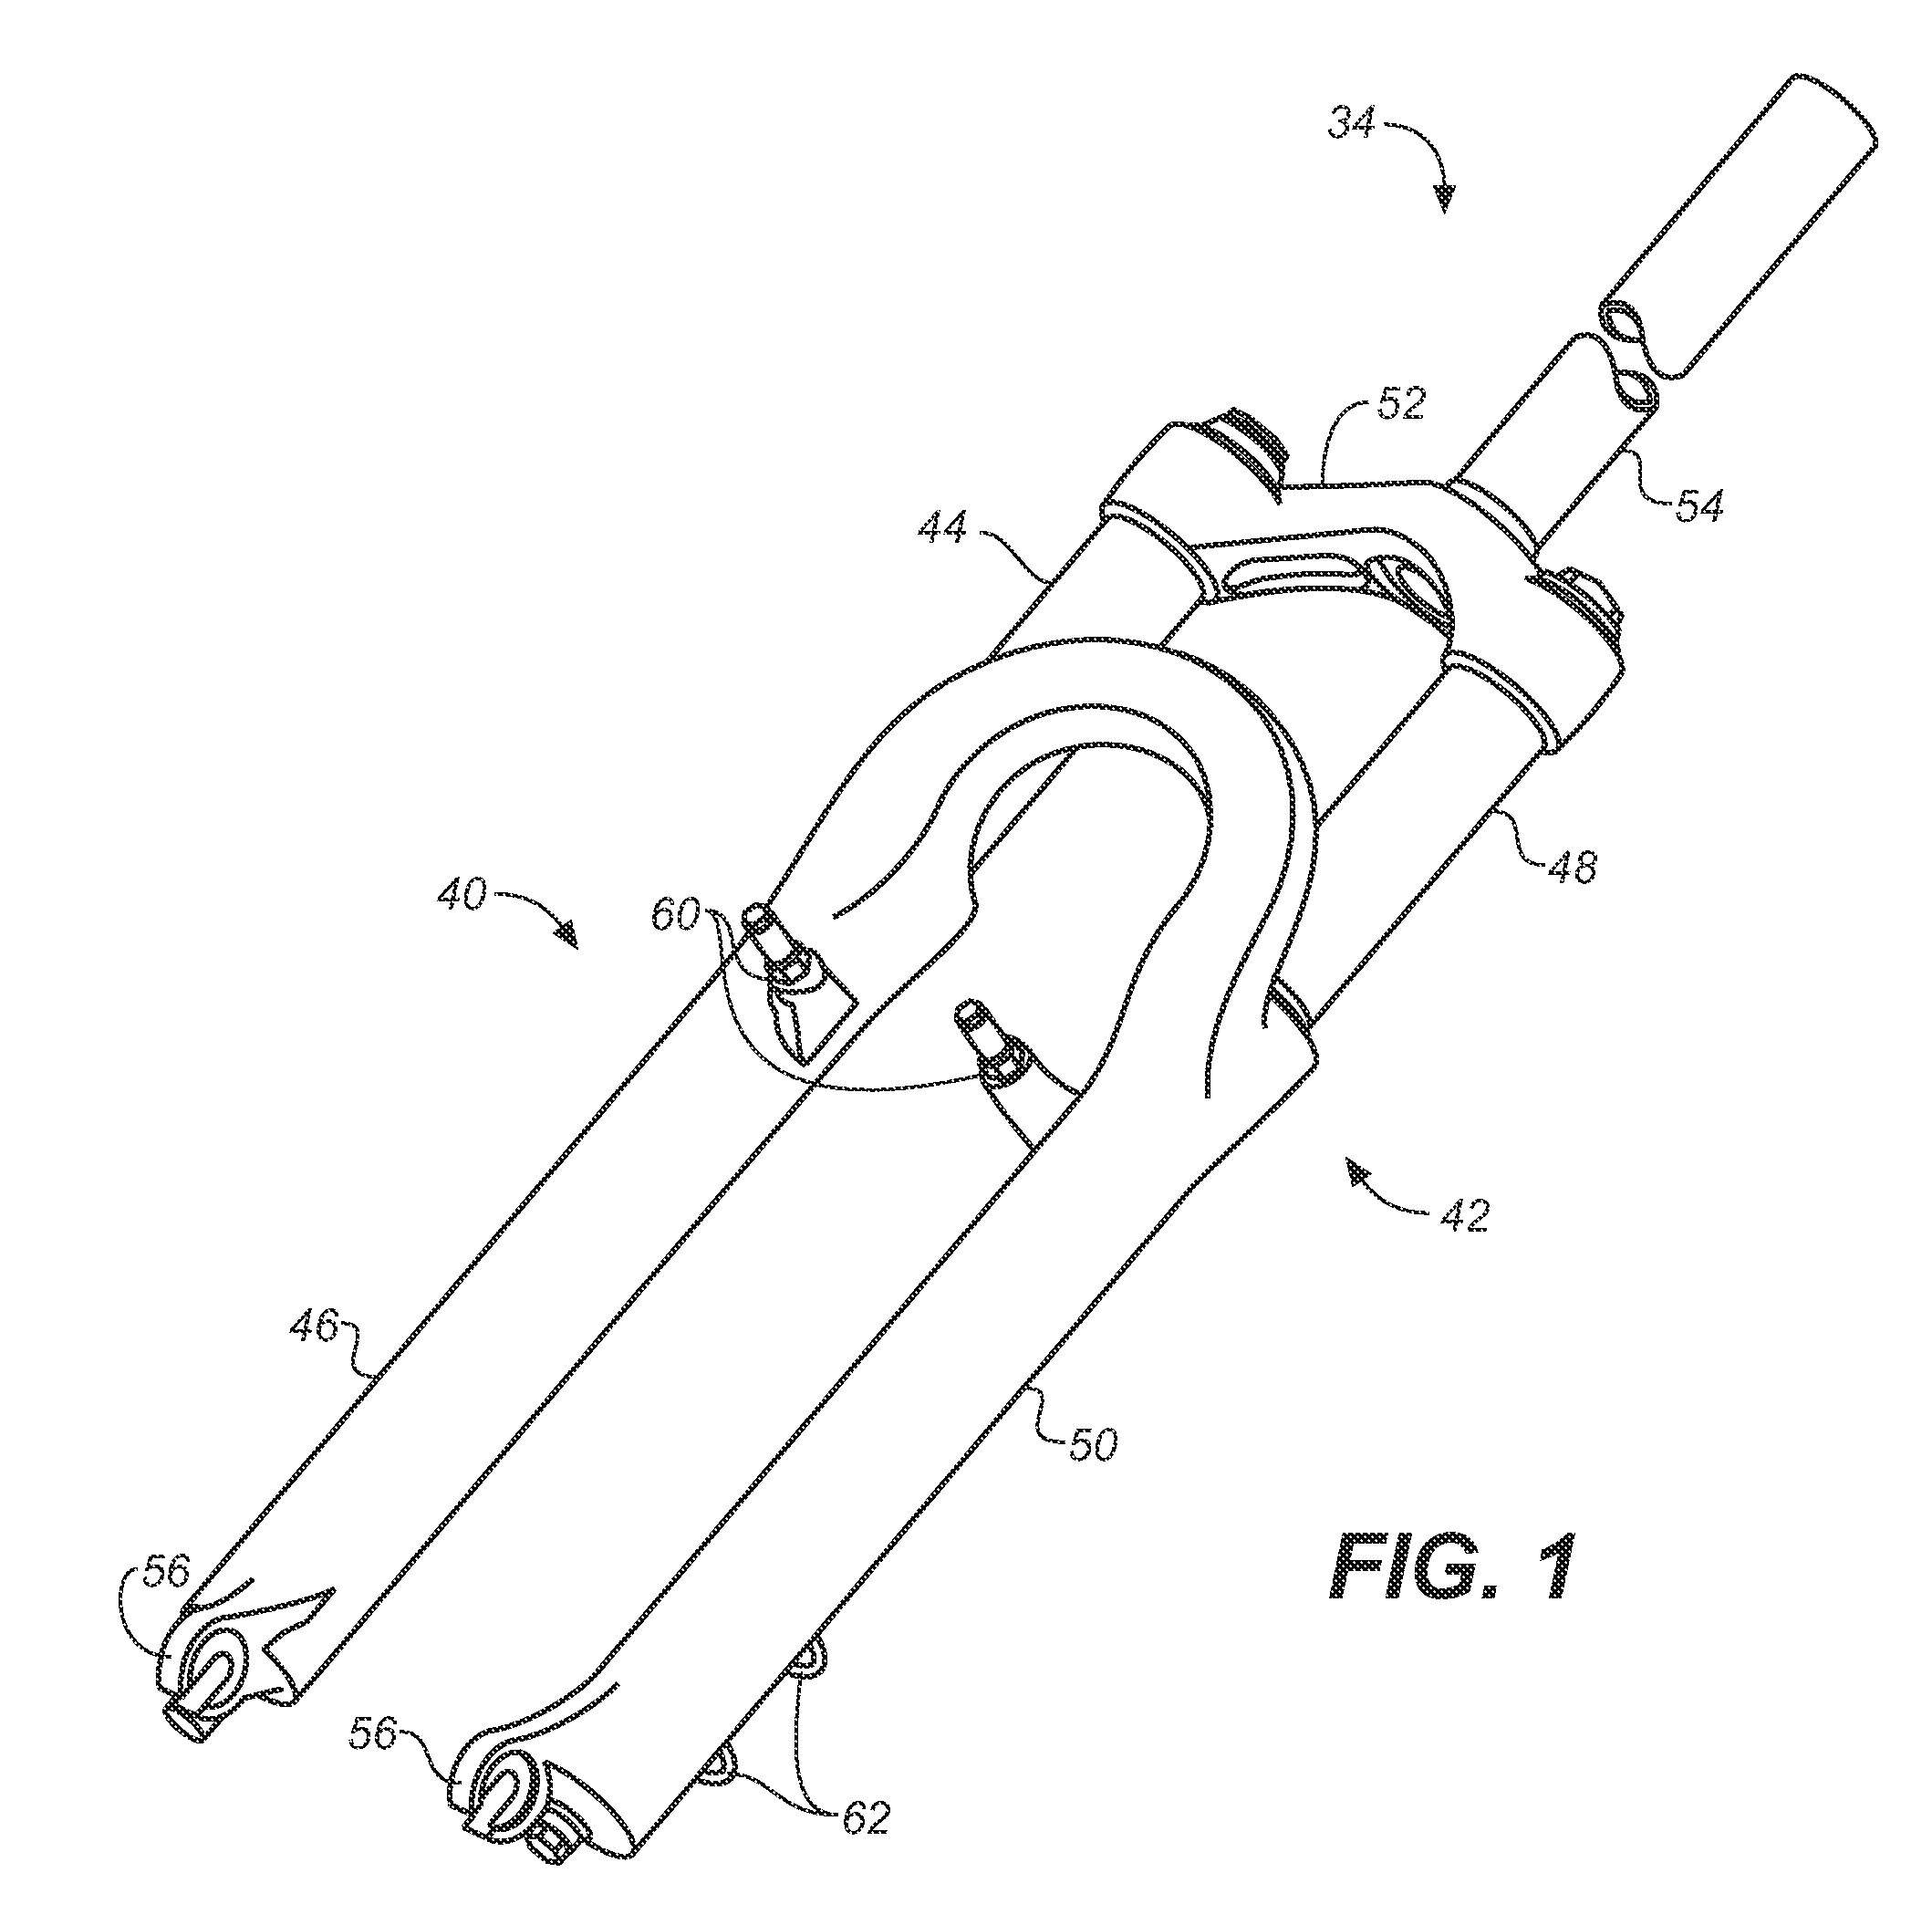 Methods and apparatus for lubricating suspension components